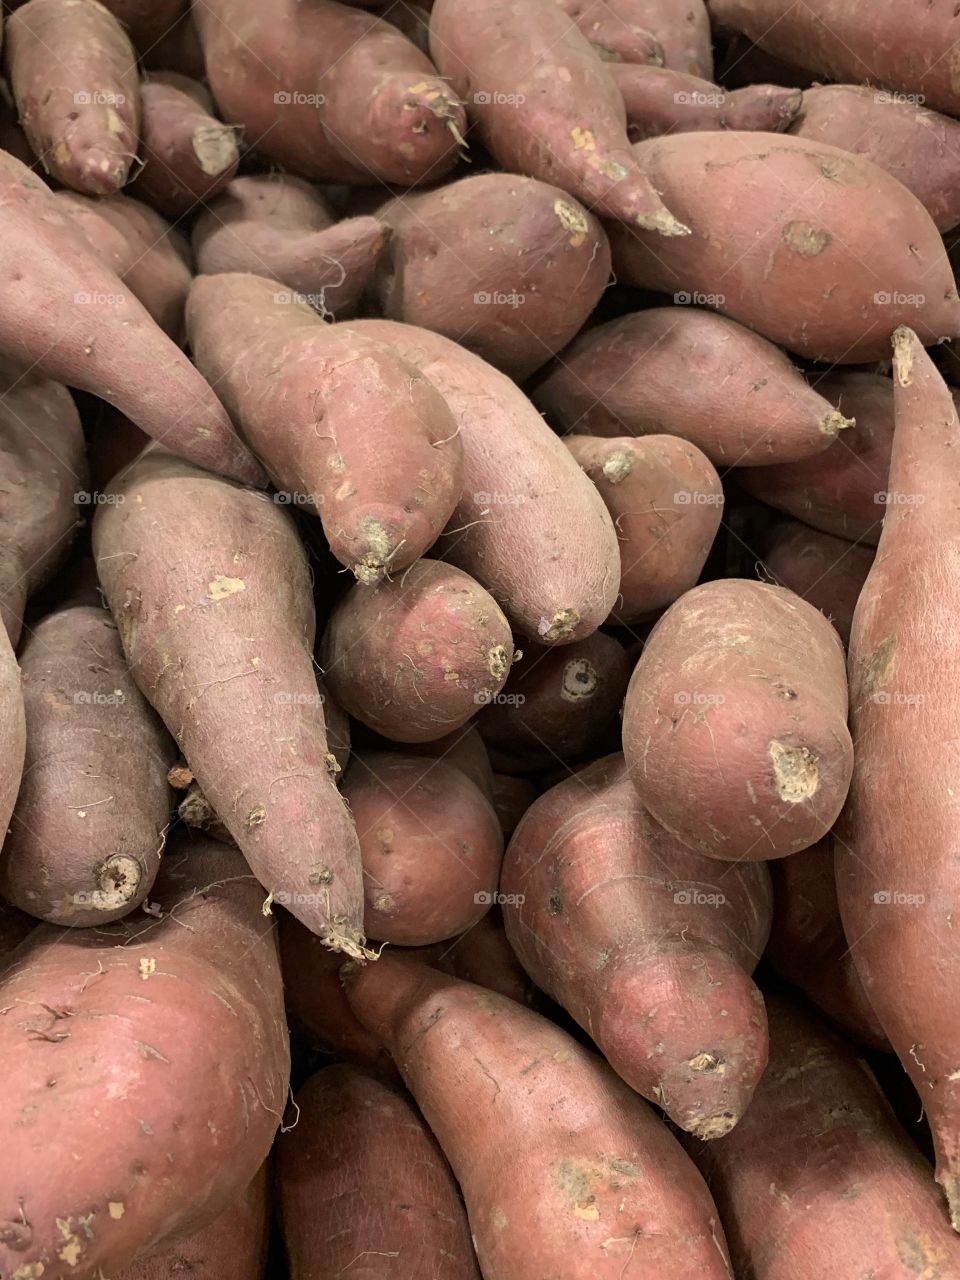 Just In Time For Sweet Potatoes!